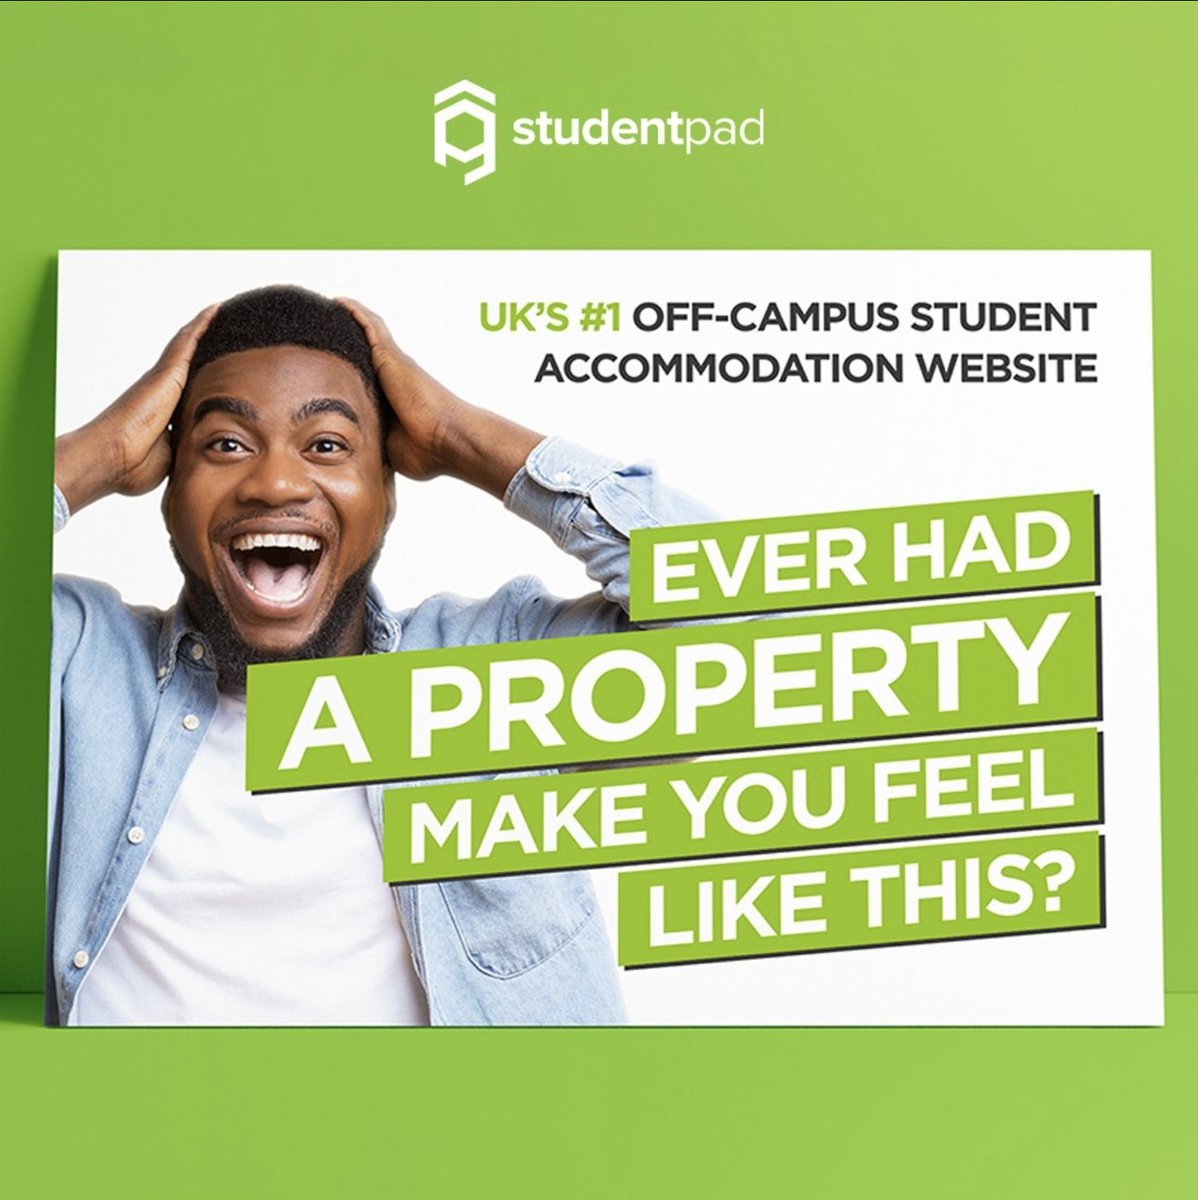 Set personalised property alerts and rent property that matches exactly what you're looking for with Studentpad! 🤩😍

#student #uniaccommodation #studentliving #studentlife #unilife #studentaccommodation #studentaccommodationuk #uni